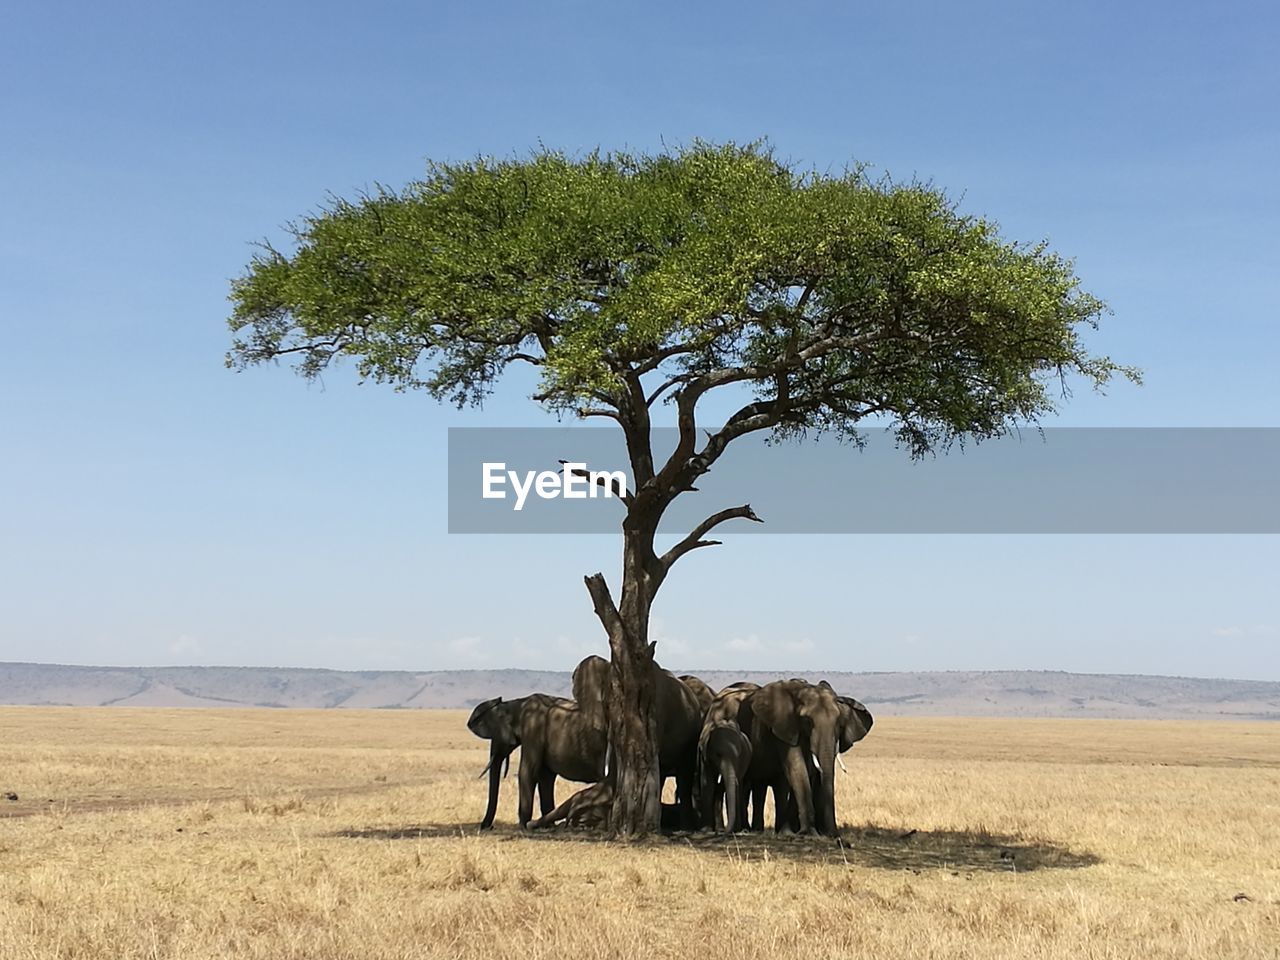 Elephants under a tree in a sunny day